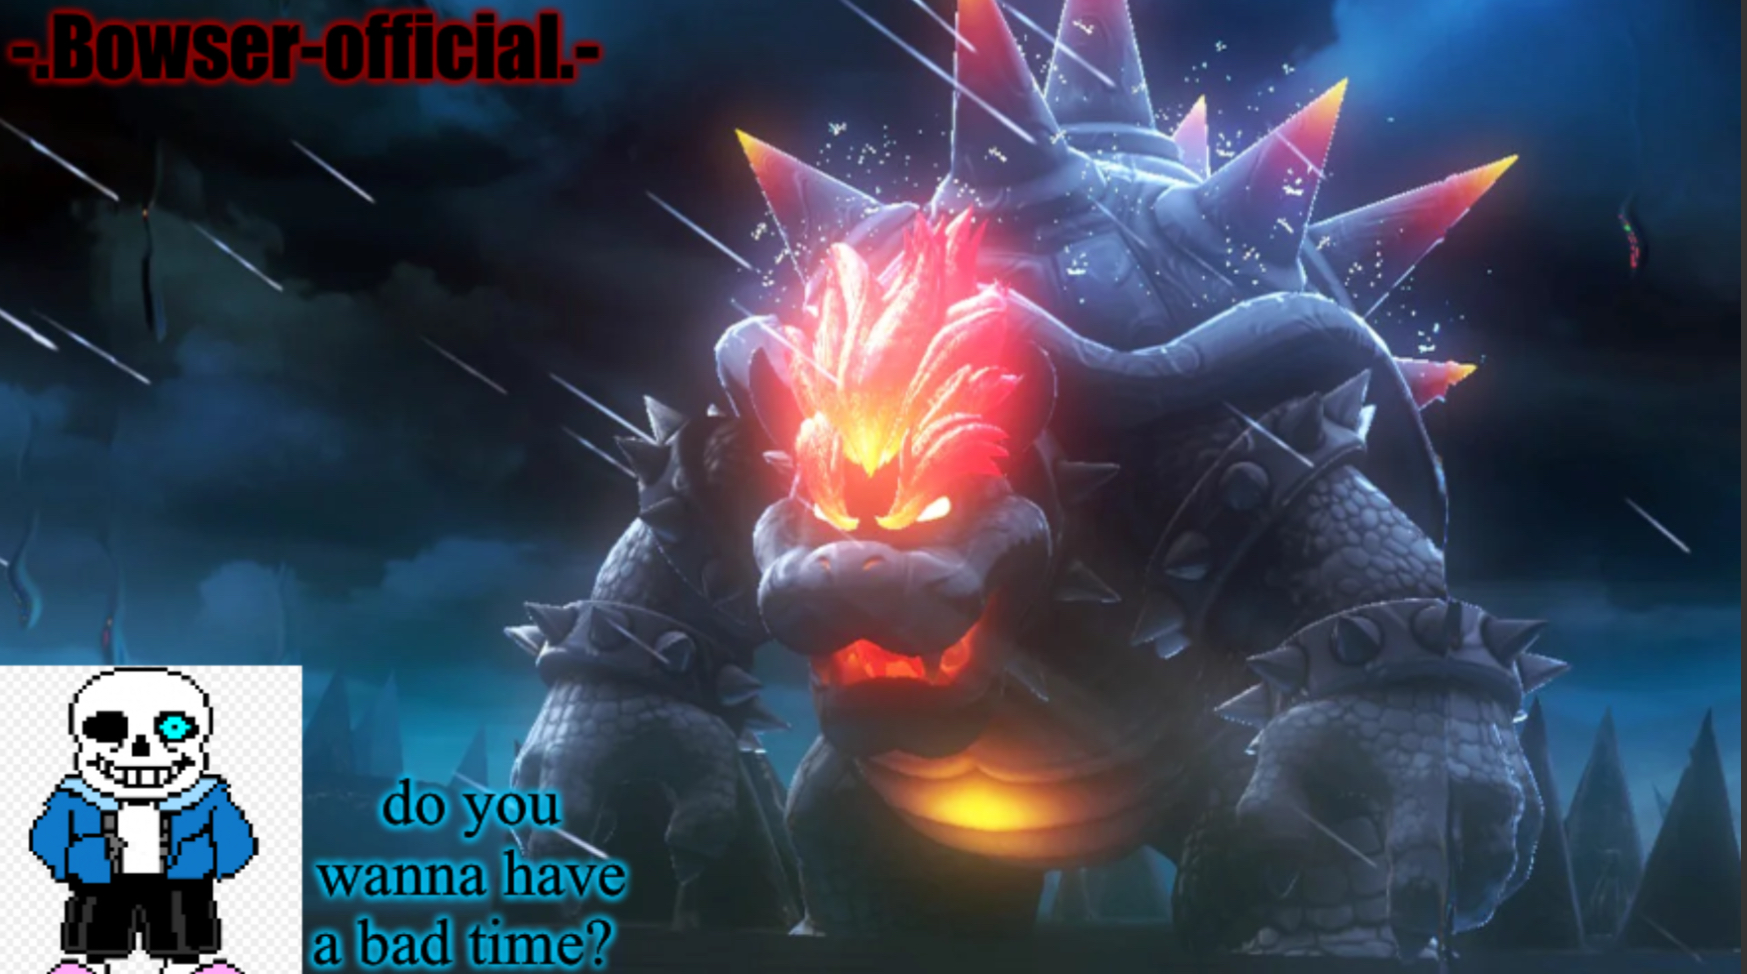 High Quality Bowser-official template Blank Meme Template